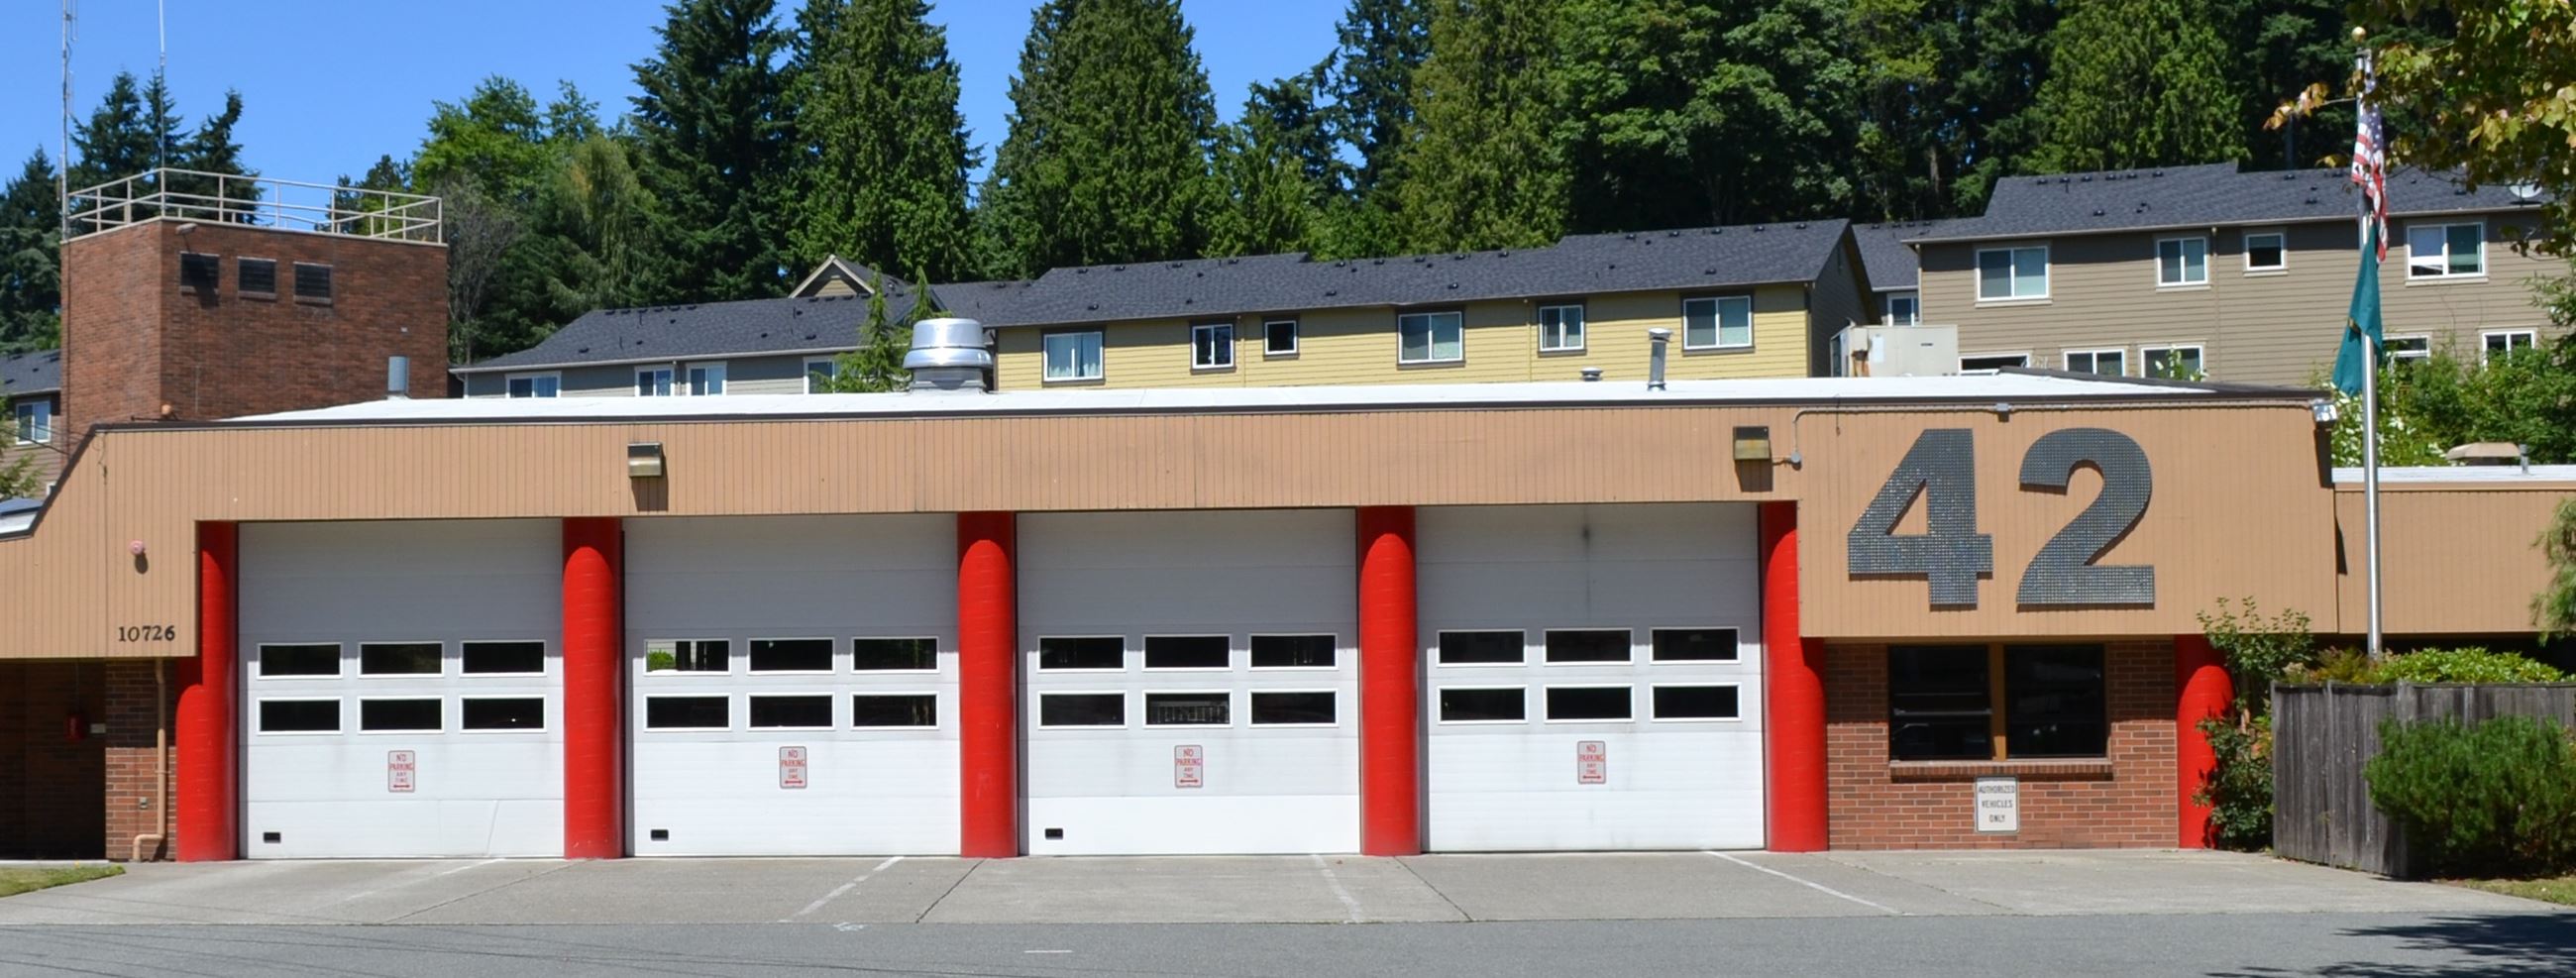 Fire Stations | Bothell WA